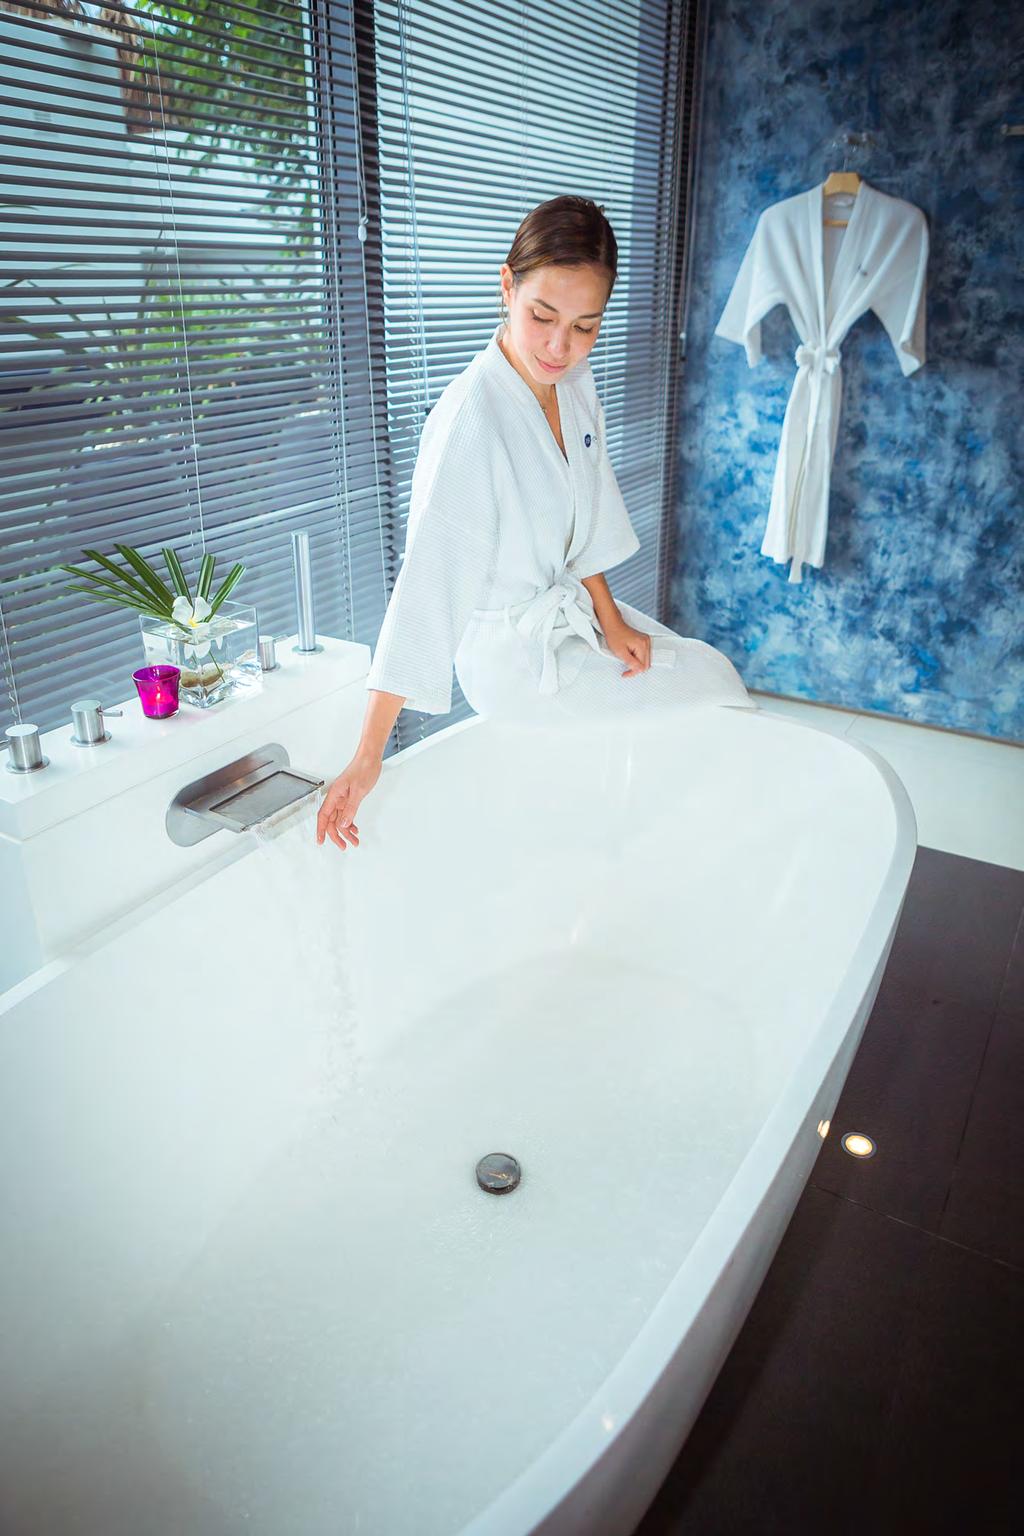 FESTIVE SPA TREATMENTS Your luxury spa experience begins the minute you enter the award-winning